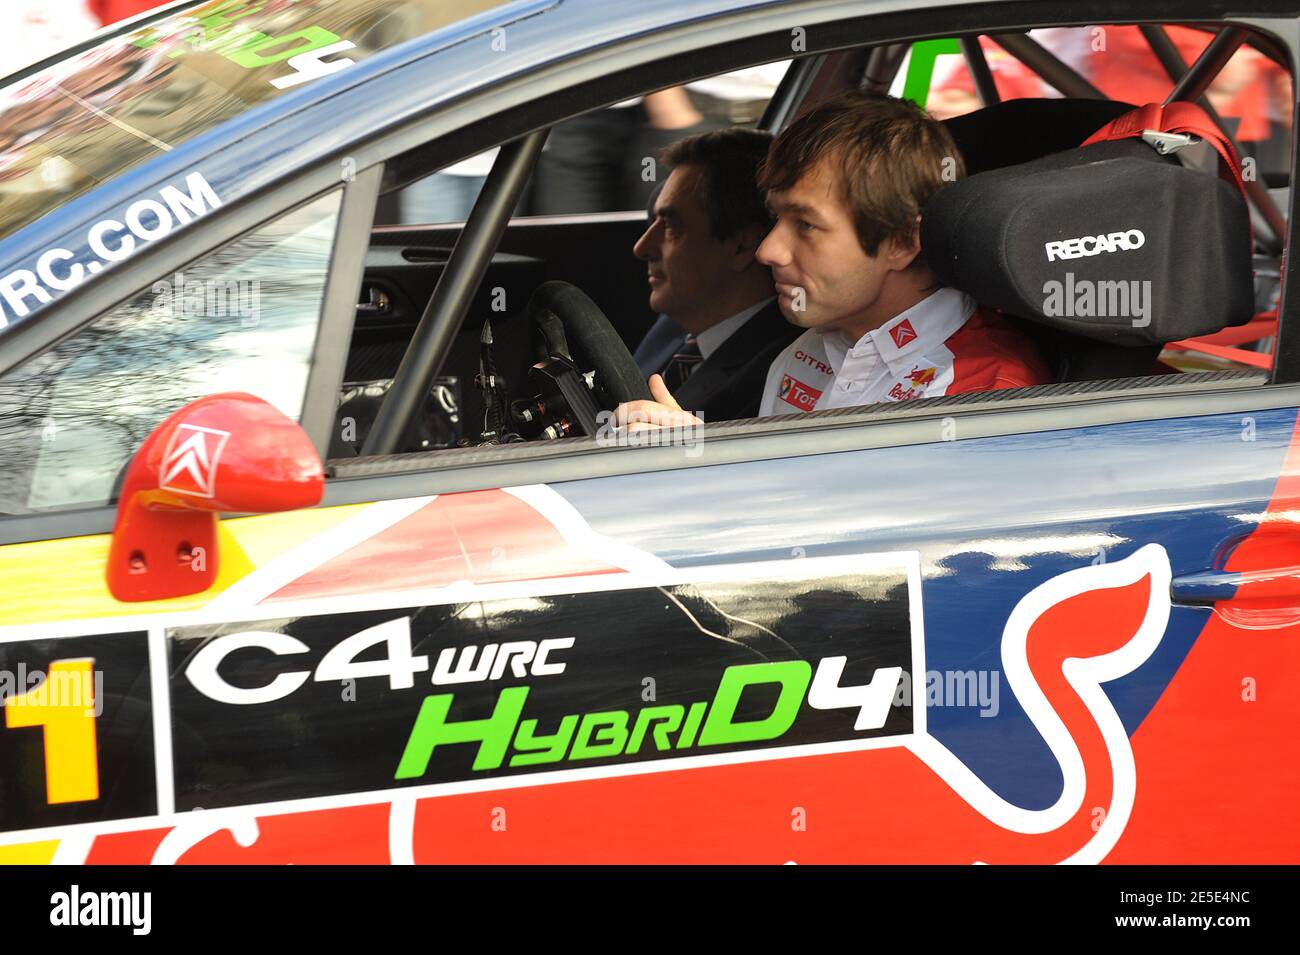 Sebastien loeb on c4 wrc hi-res stock photography and images - Alamy